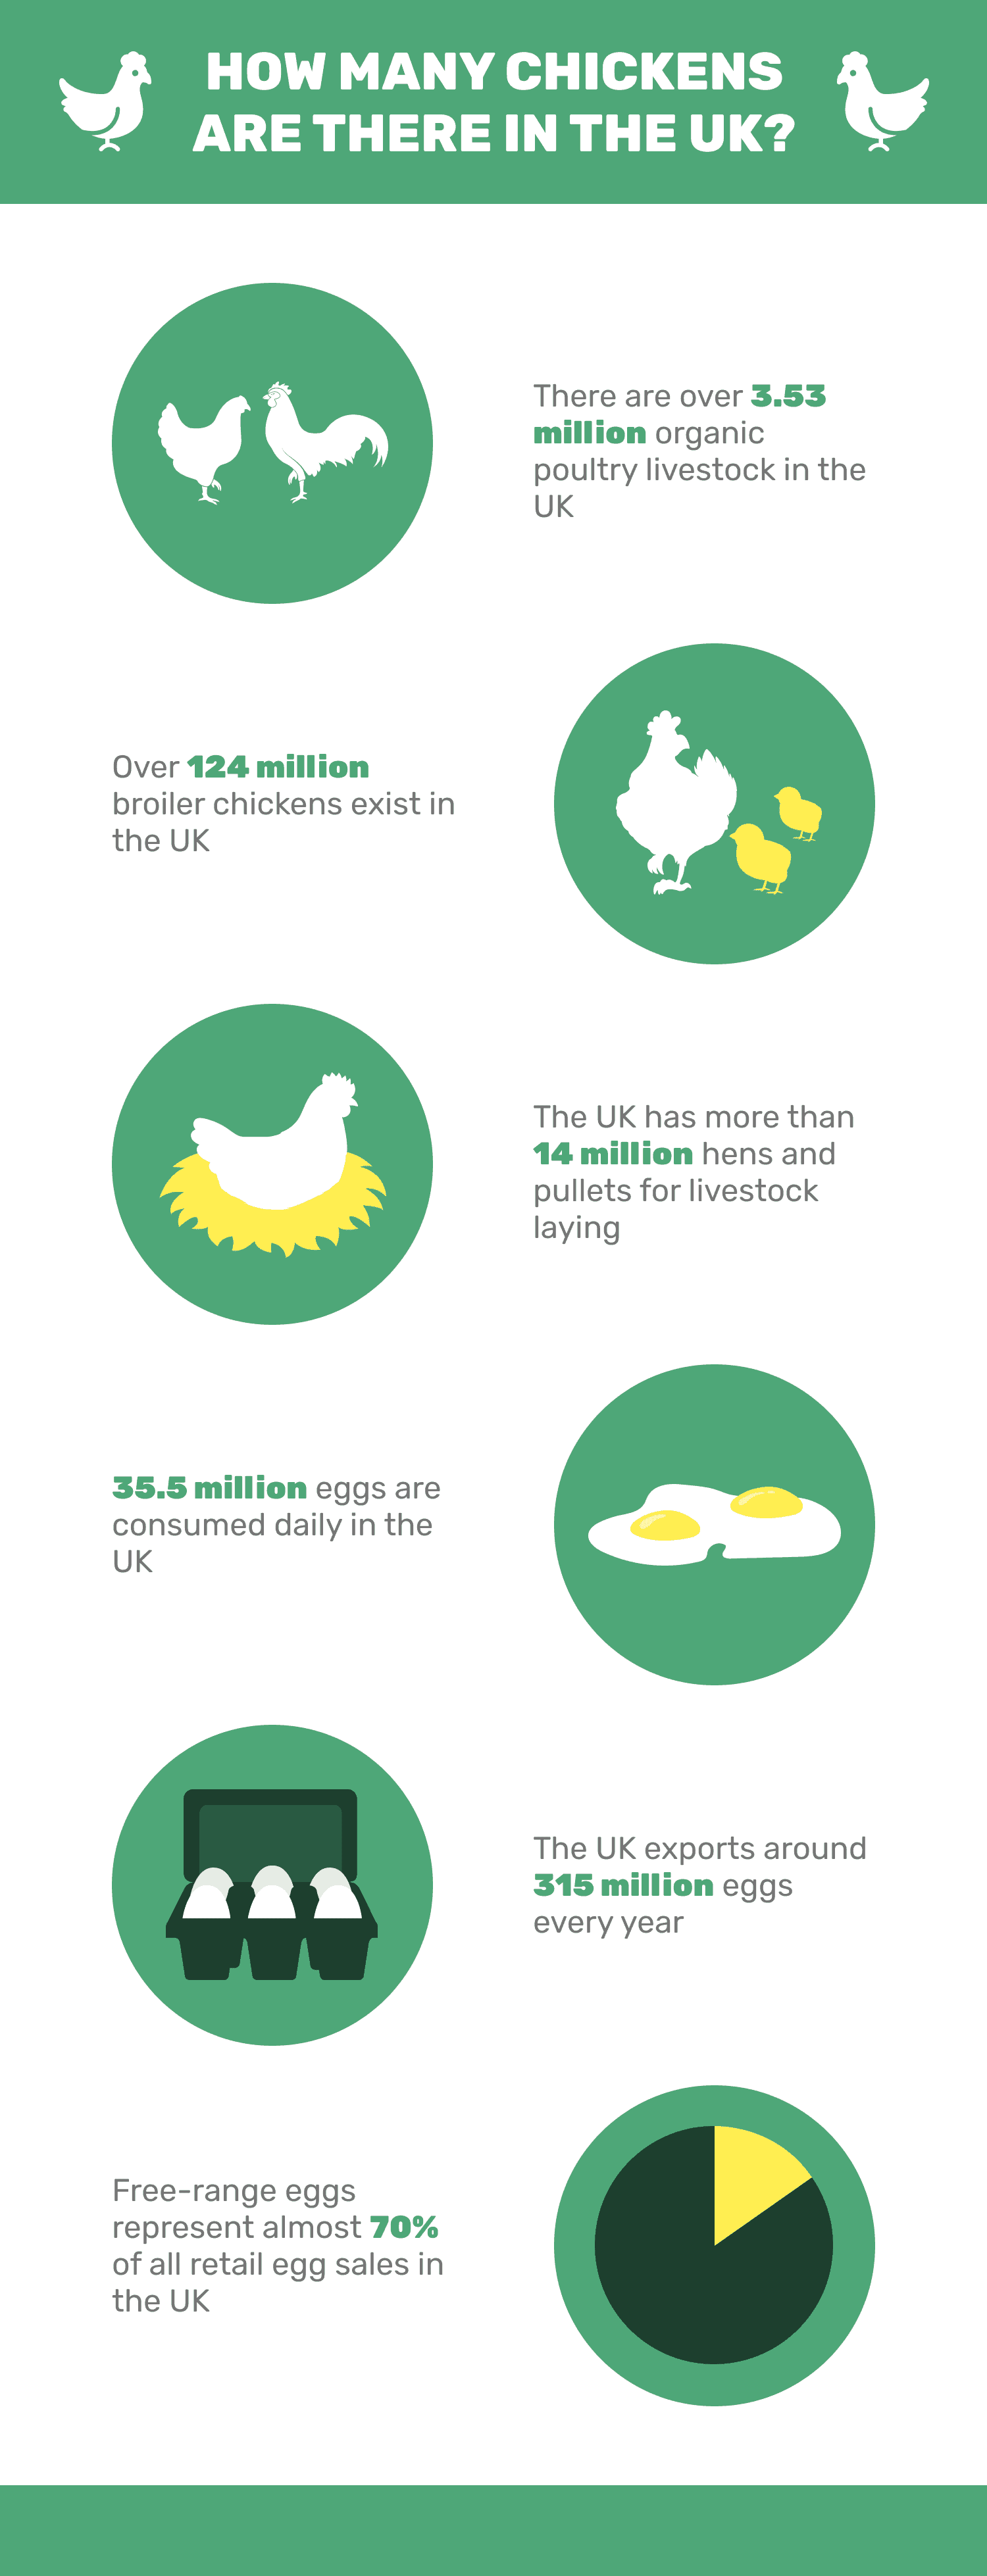 Chickens in the UK